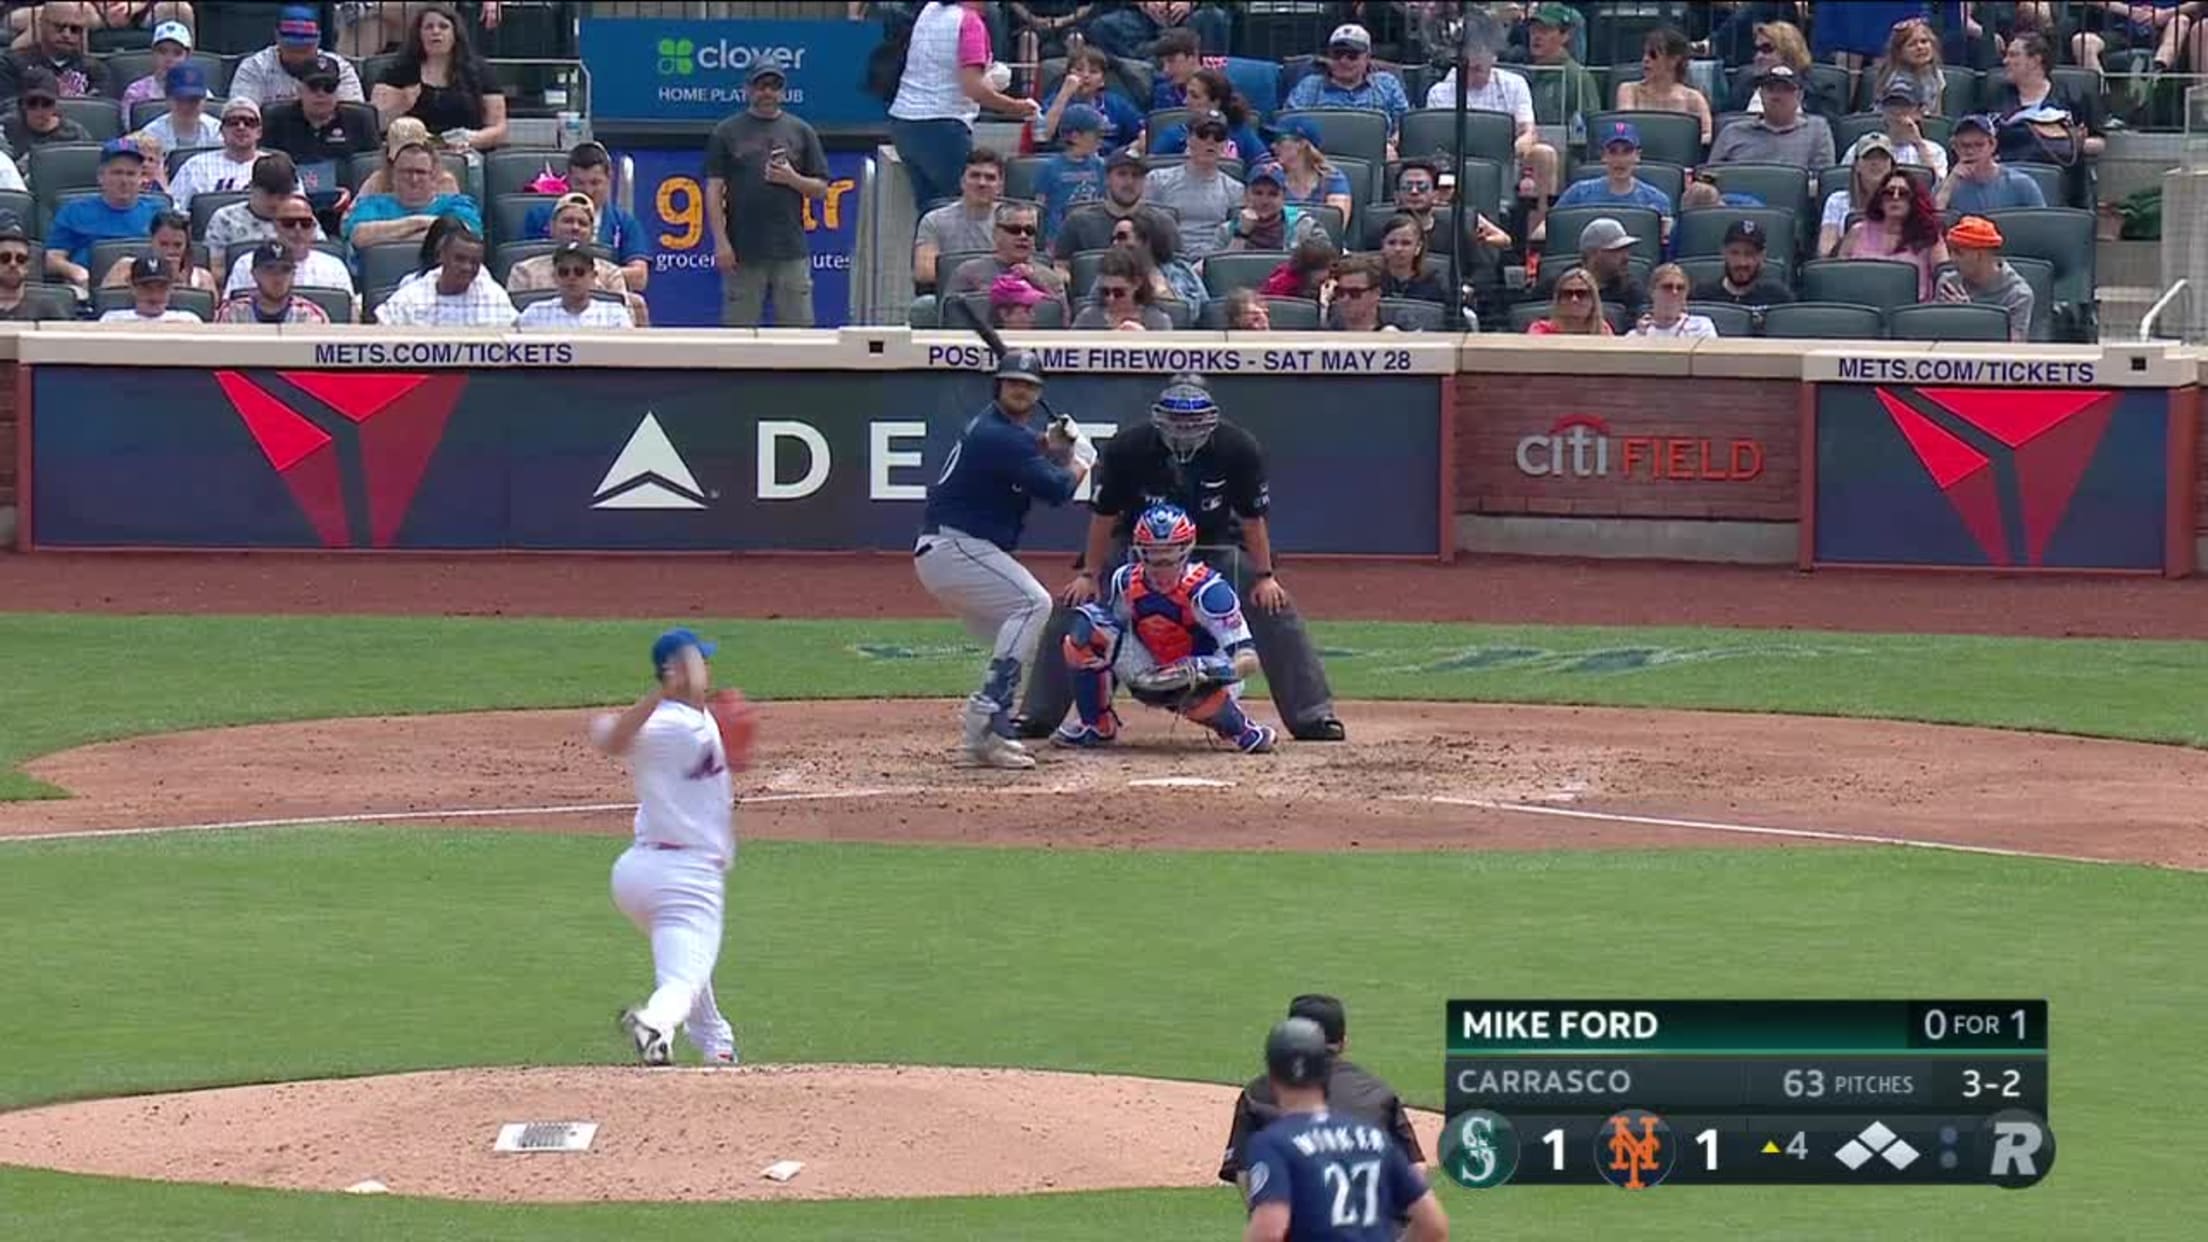 Mike Ford gets tossed from the Dugout after a questionable strikeout on a  full count : r/baseball